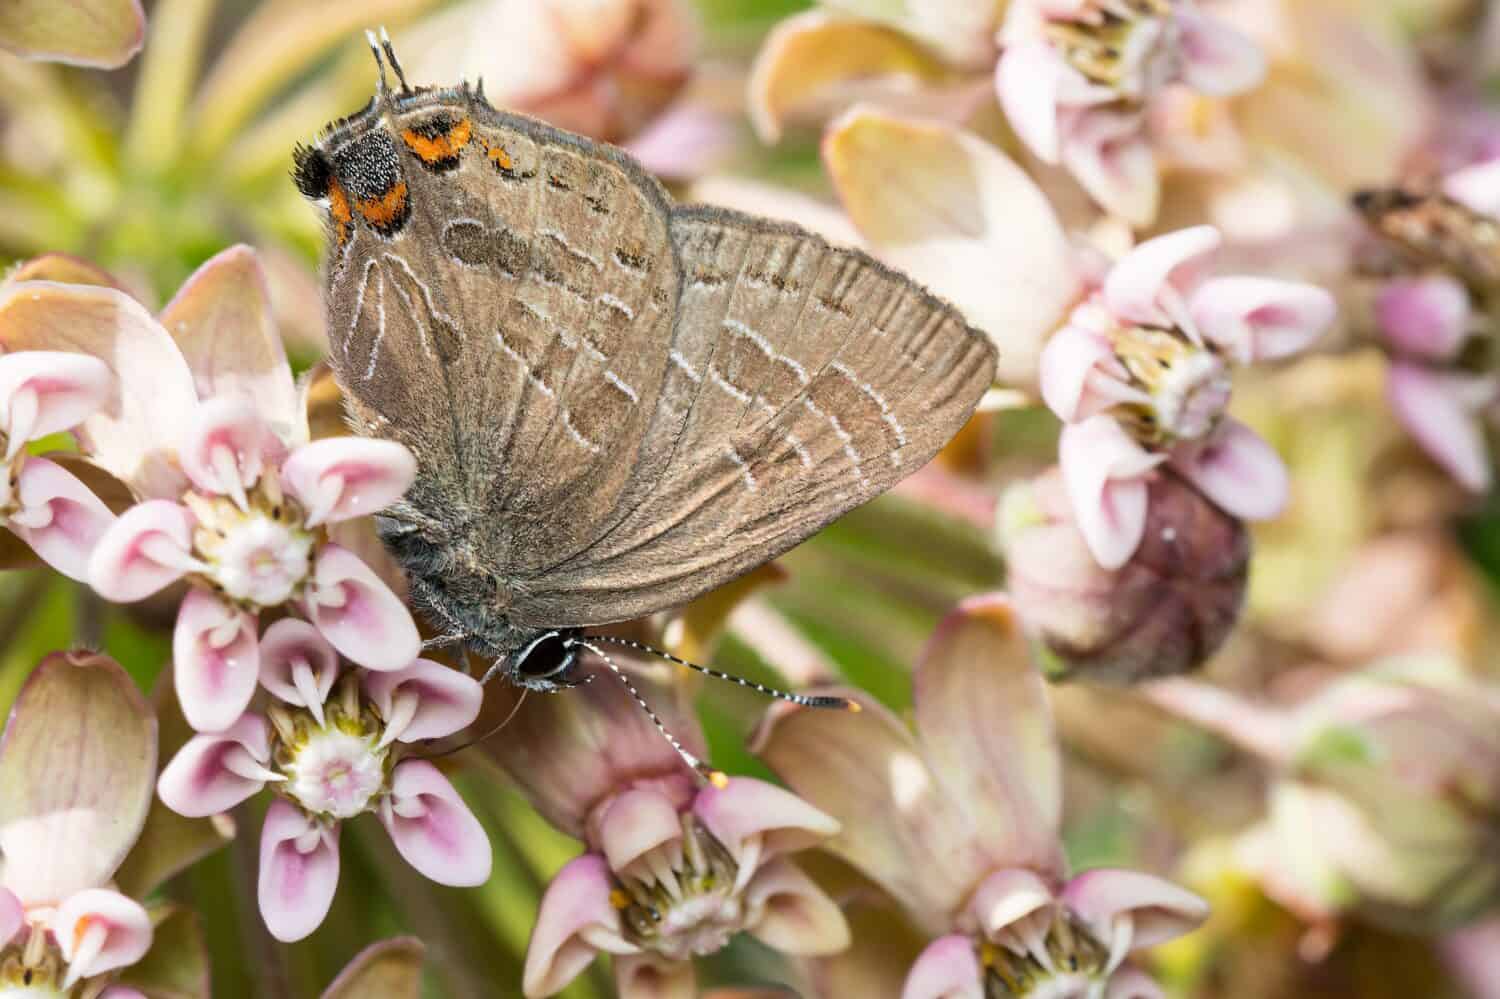 A Striped Hairstreak is collecting nectar from pink Milkweed flowers. Taylor Creek Park, Toronto, Ontario, Canada.